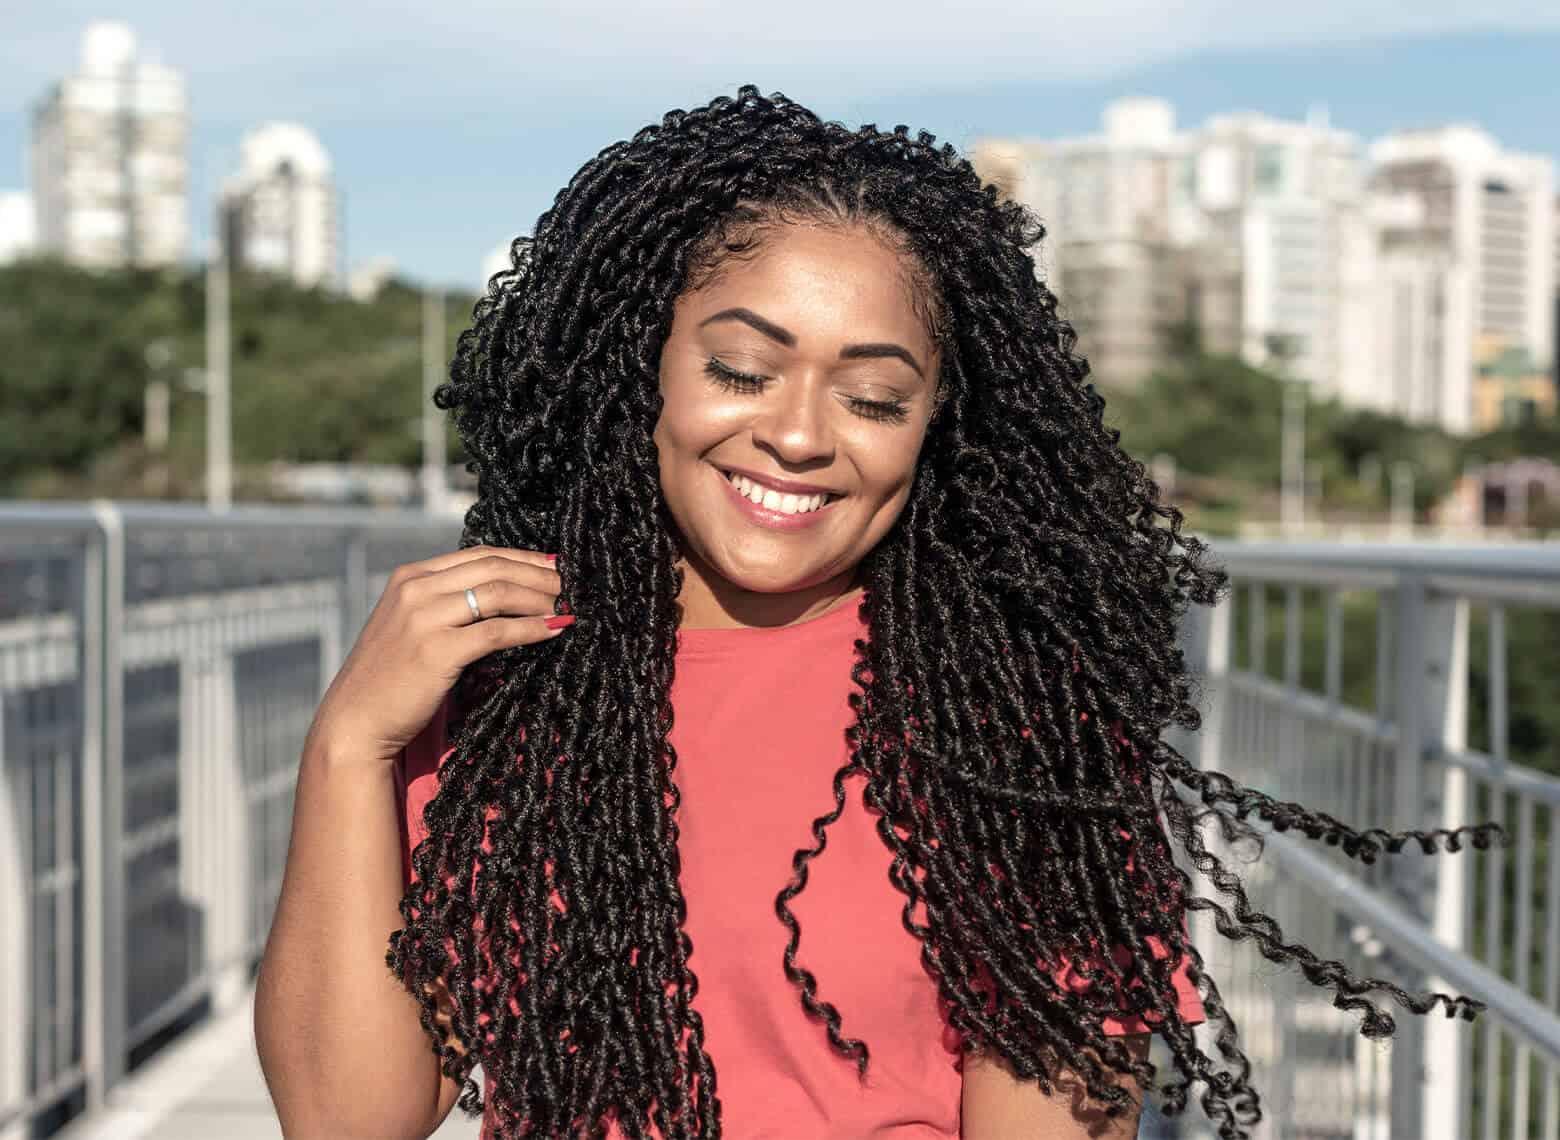 7 Hairstyles With Braids for Black Women to Try - Kings Plate Catering